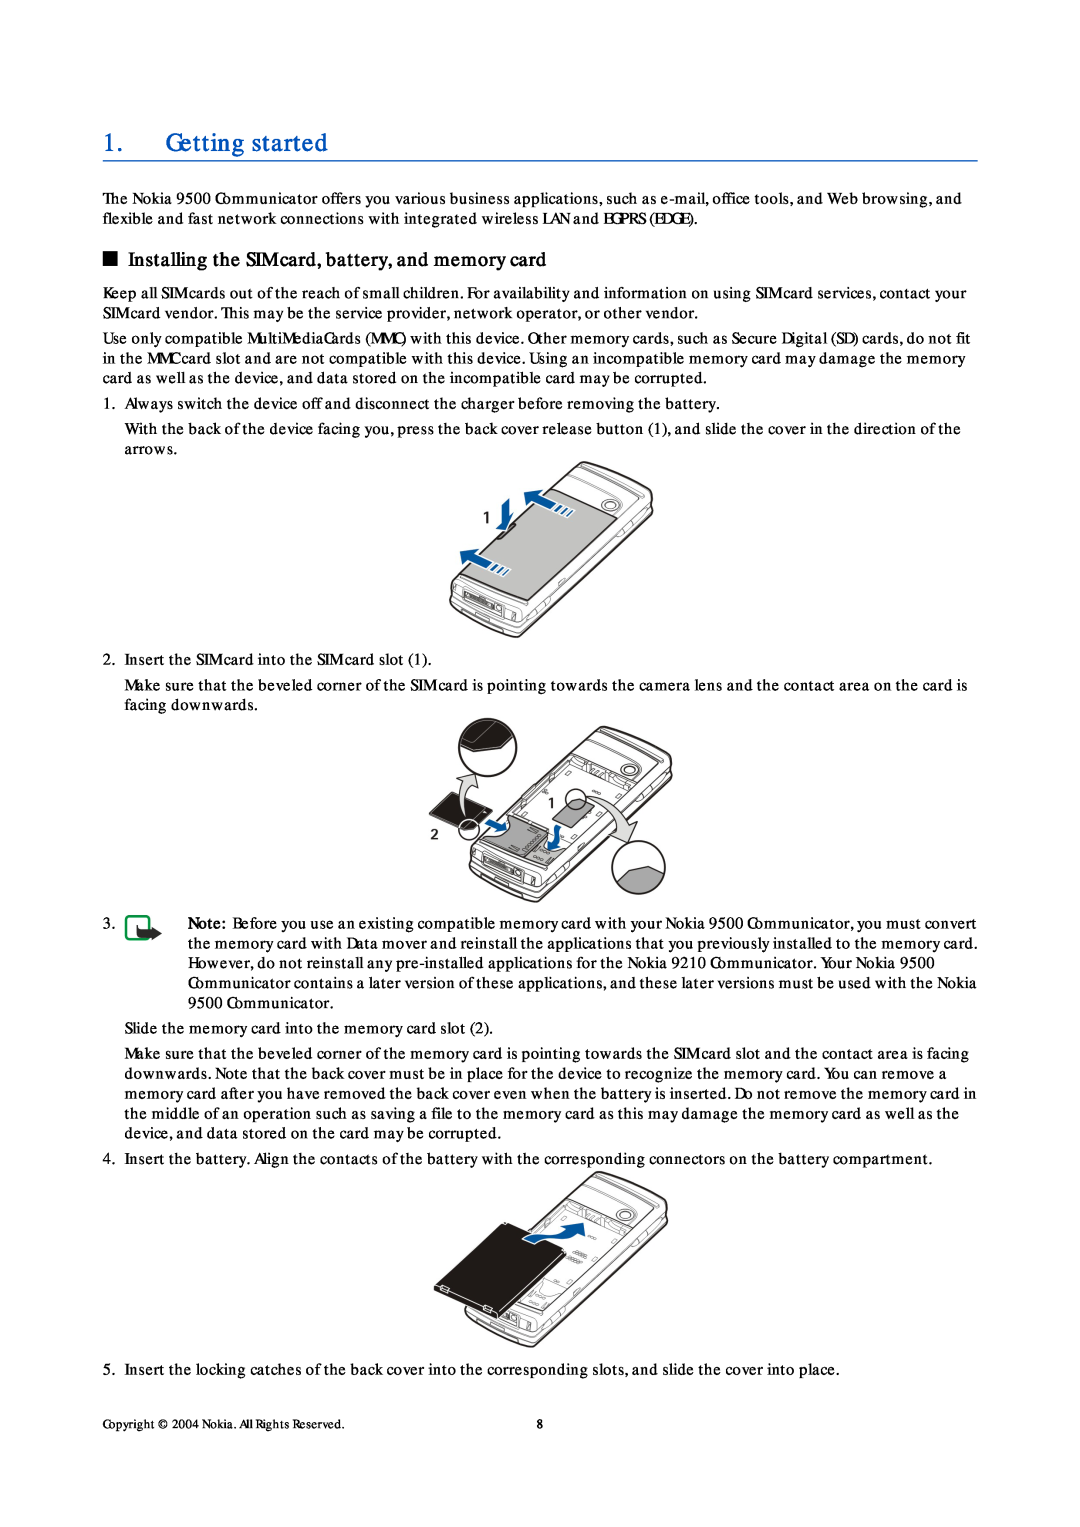 Nokia 9500 manual Getting started, Installing the SIM card, battery, and memory card 